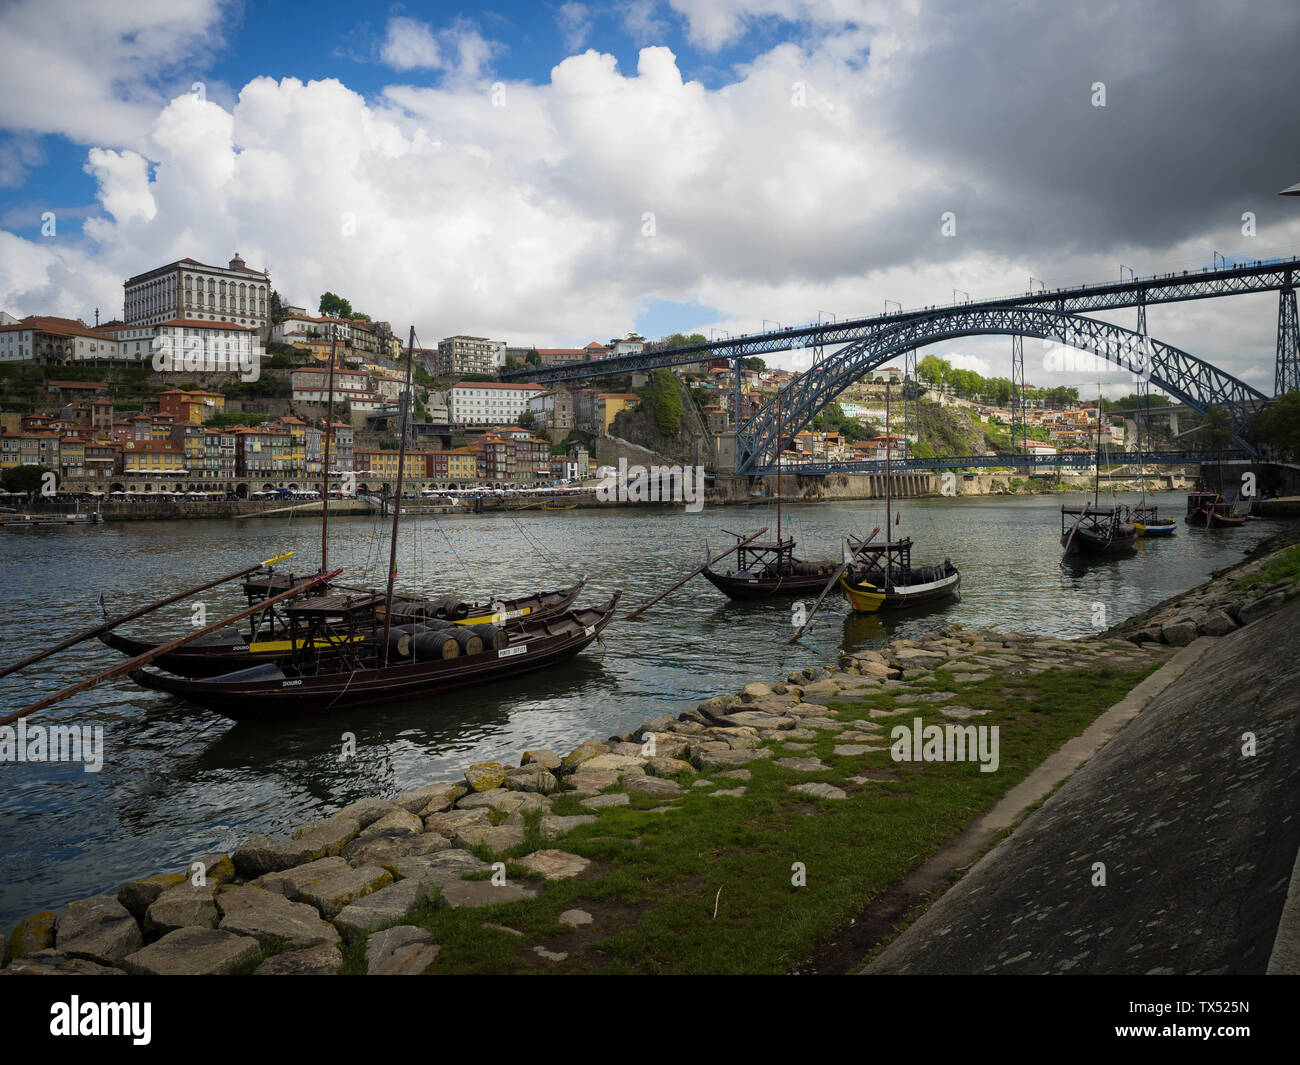 Casks of port aging in boats on the river Douro in Porto, Portugal with the World Heritage skyline behind them Stock Photo